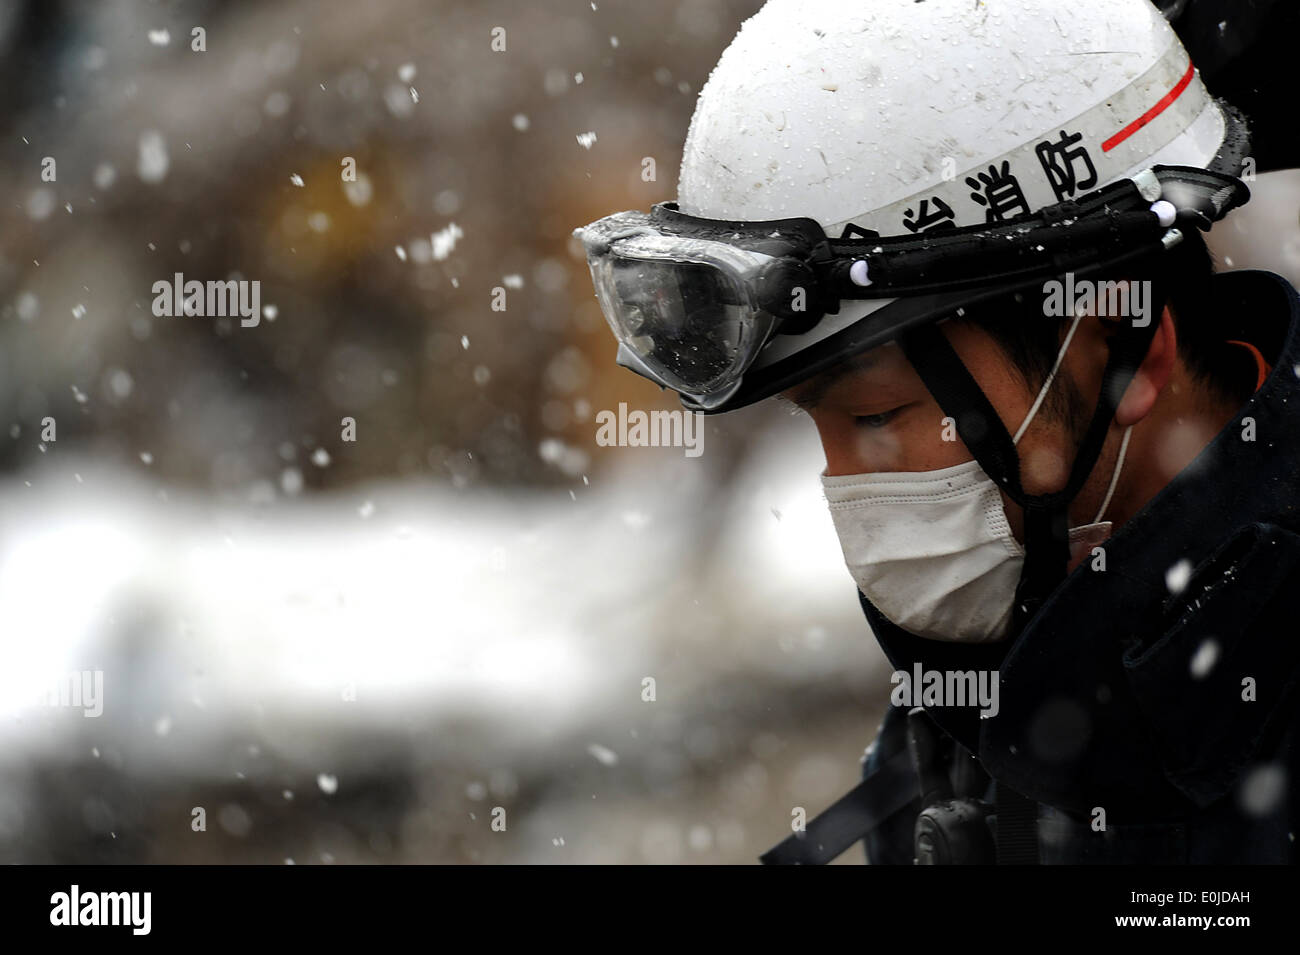 A member with the Japanese Search and Rescue team searches through the damage and debris on March 17, 2011, in Unosumai, Japan Stock Photo